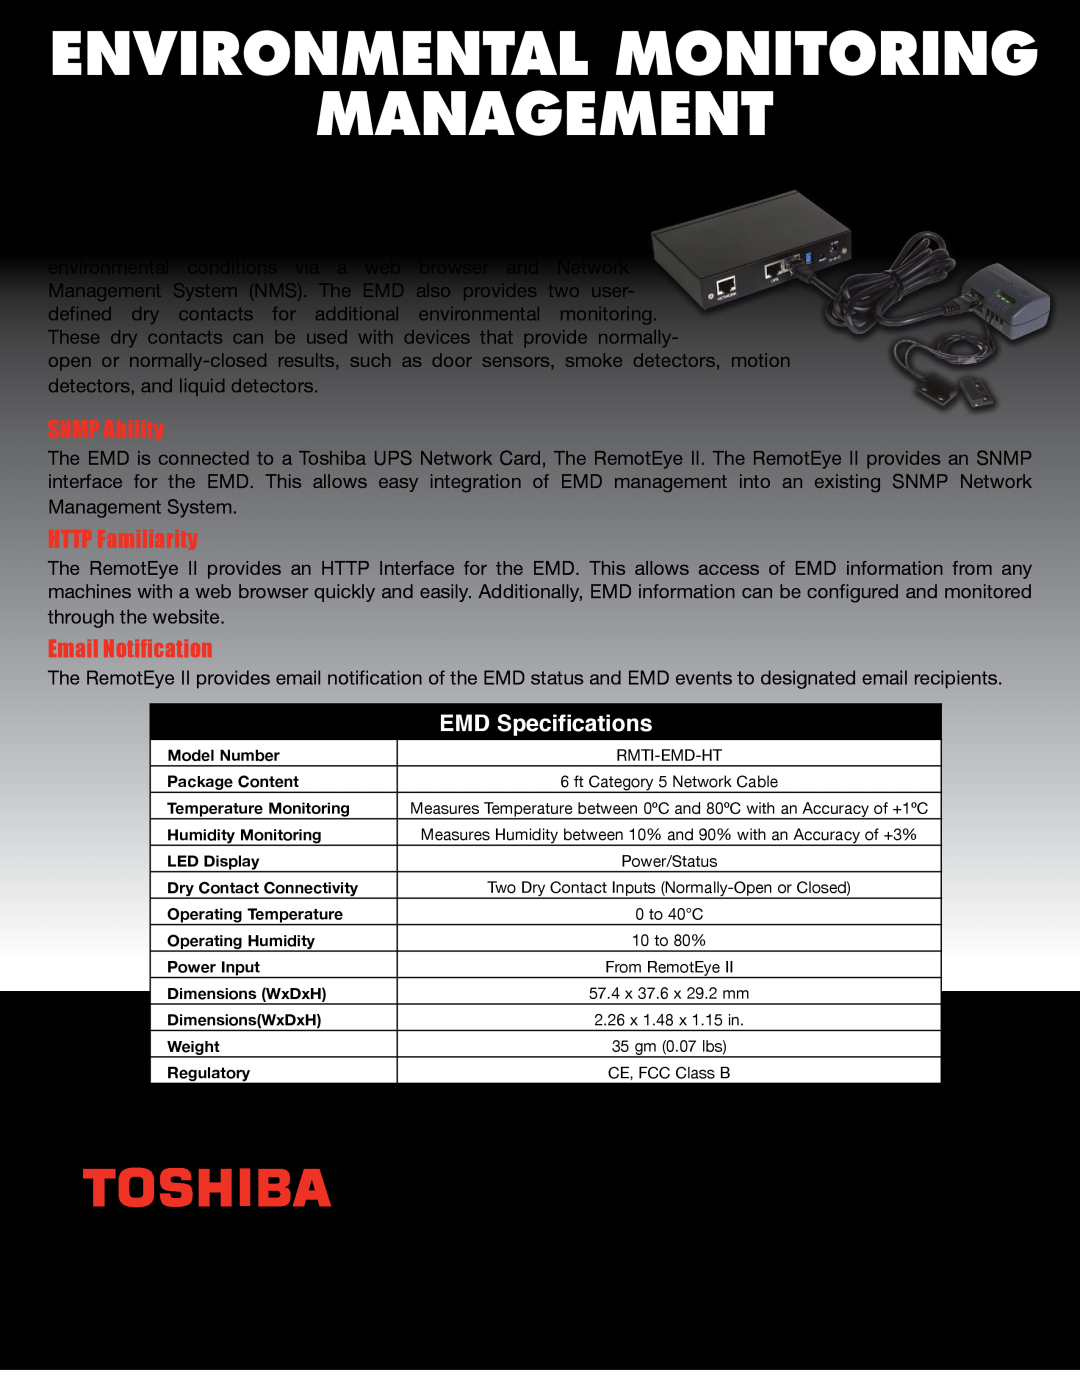 Toshiba RMTI-EMD-HT manual Environmental Monitoring Management, SNMP Ability, HTTP Familiarity, Email Notification, Motors 